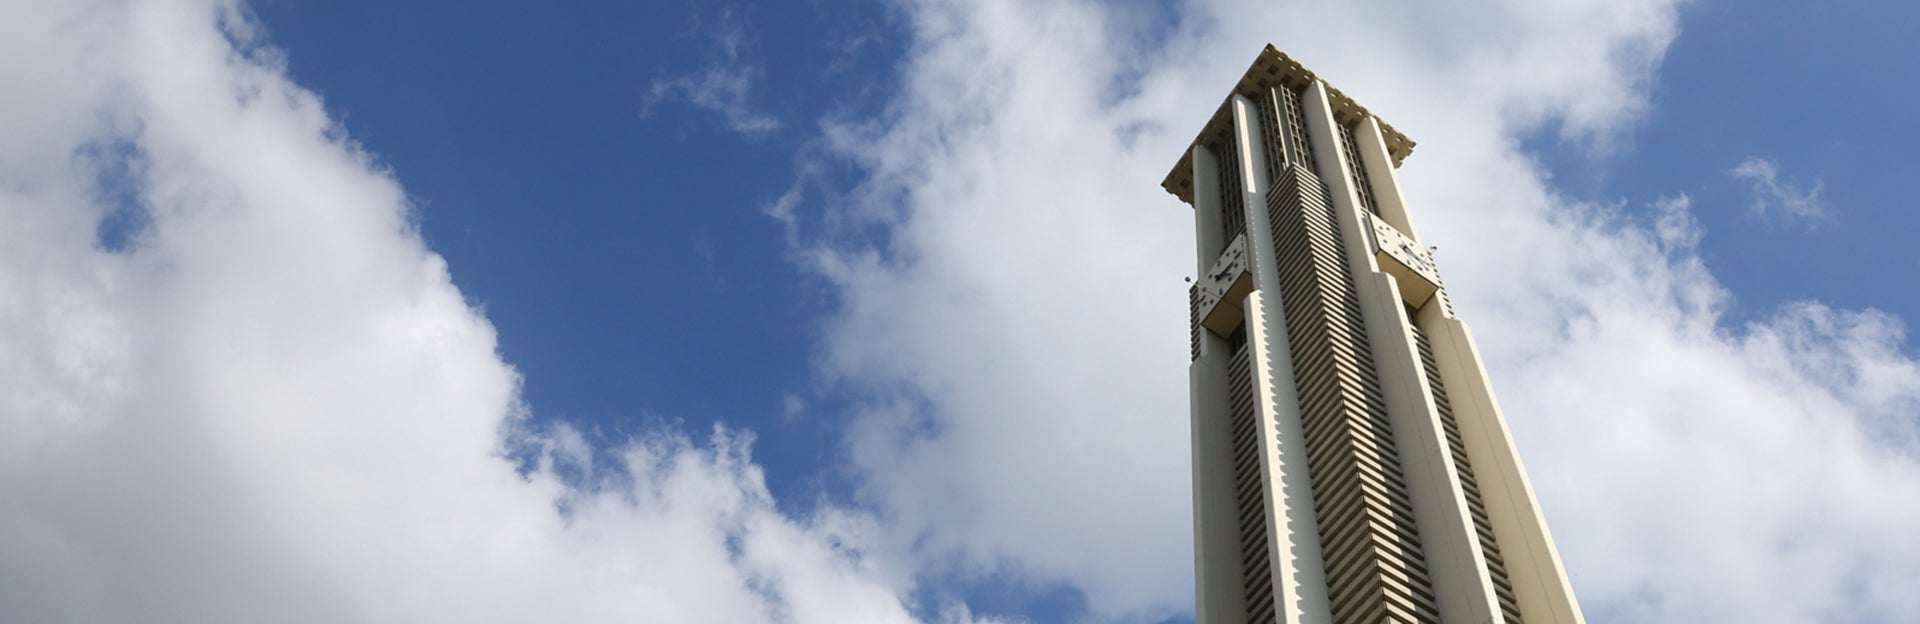 (c) UCR/Stan Lim - looking up at the Bell Tower